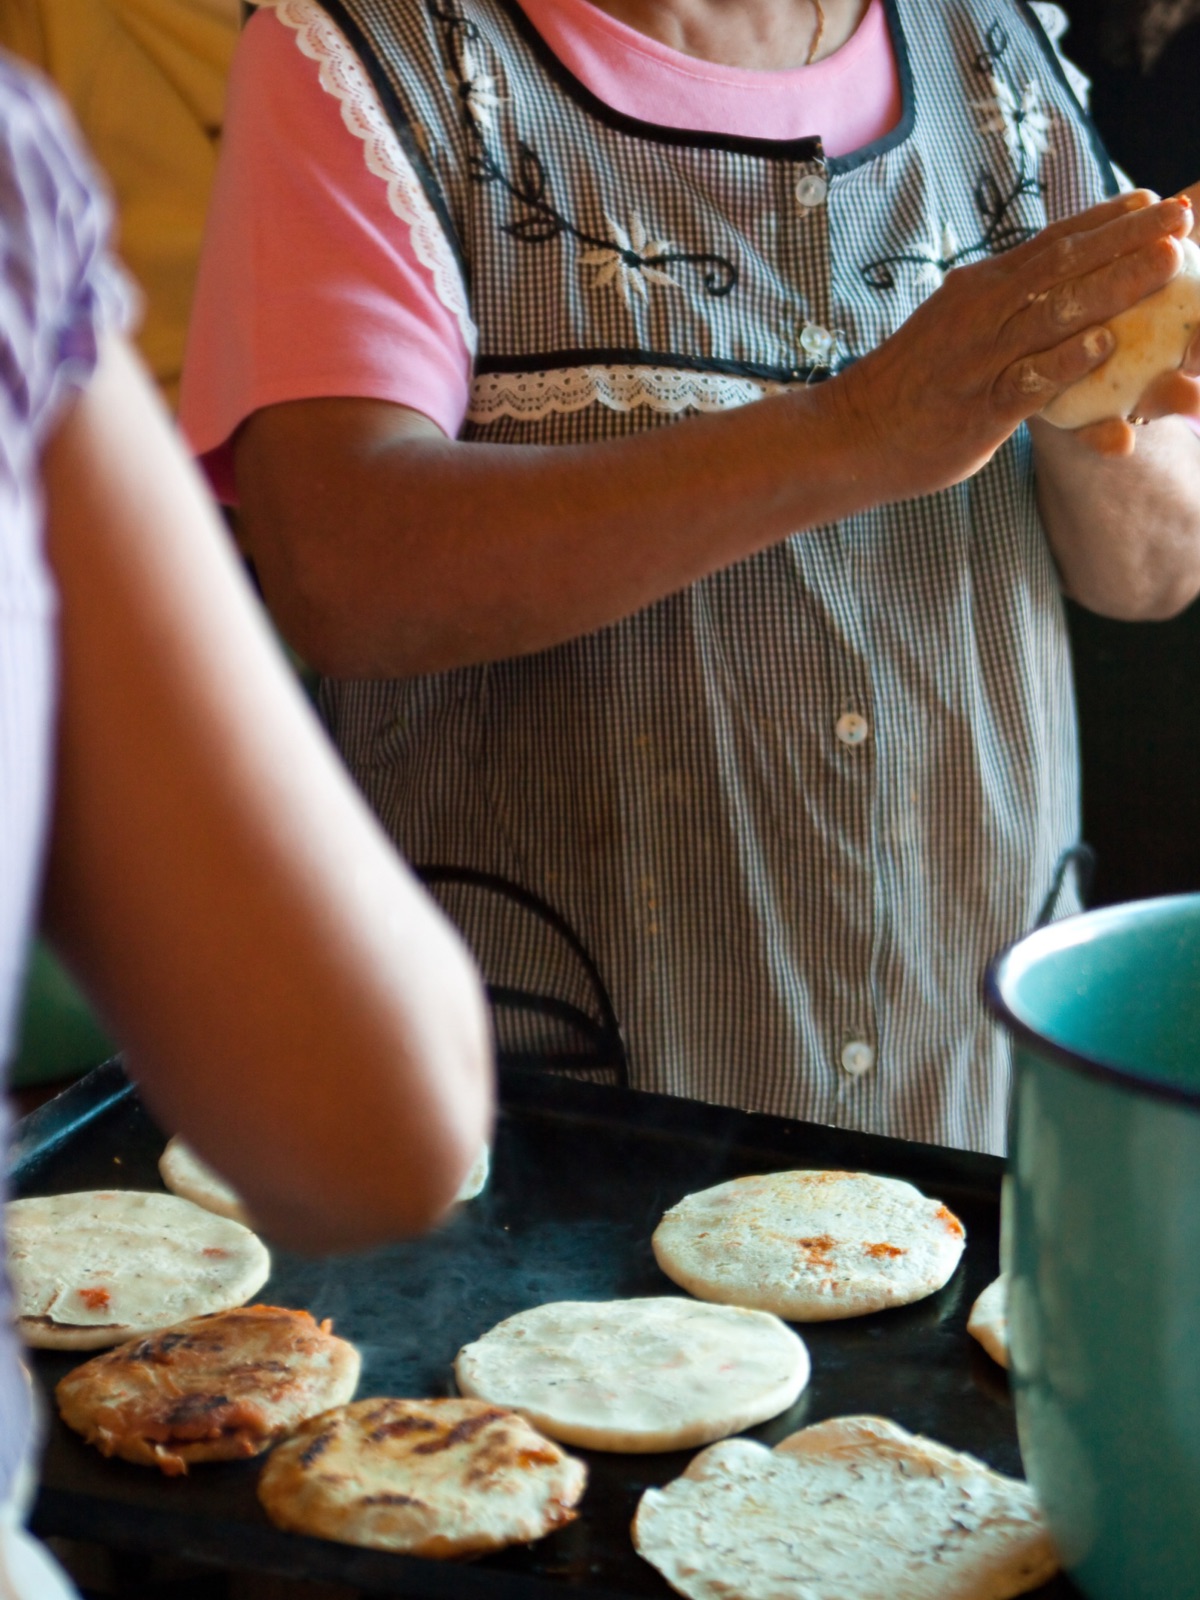 Mexican cook making tortillas.